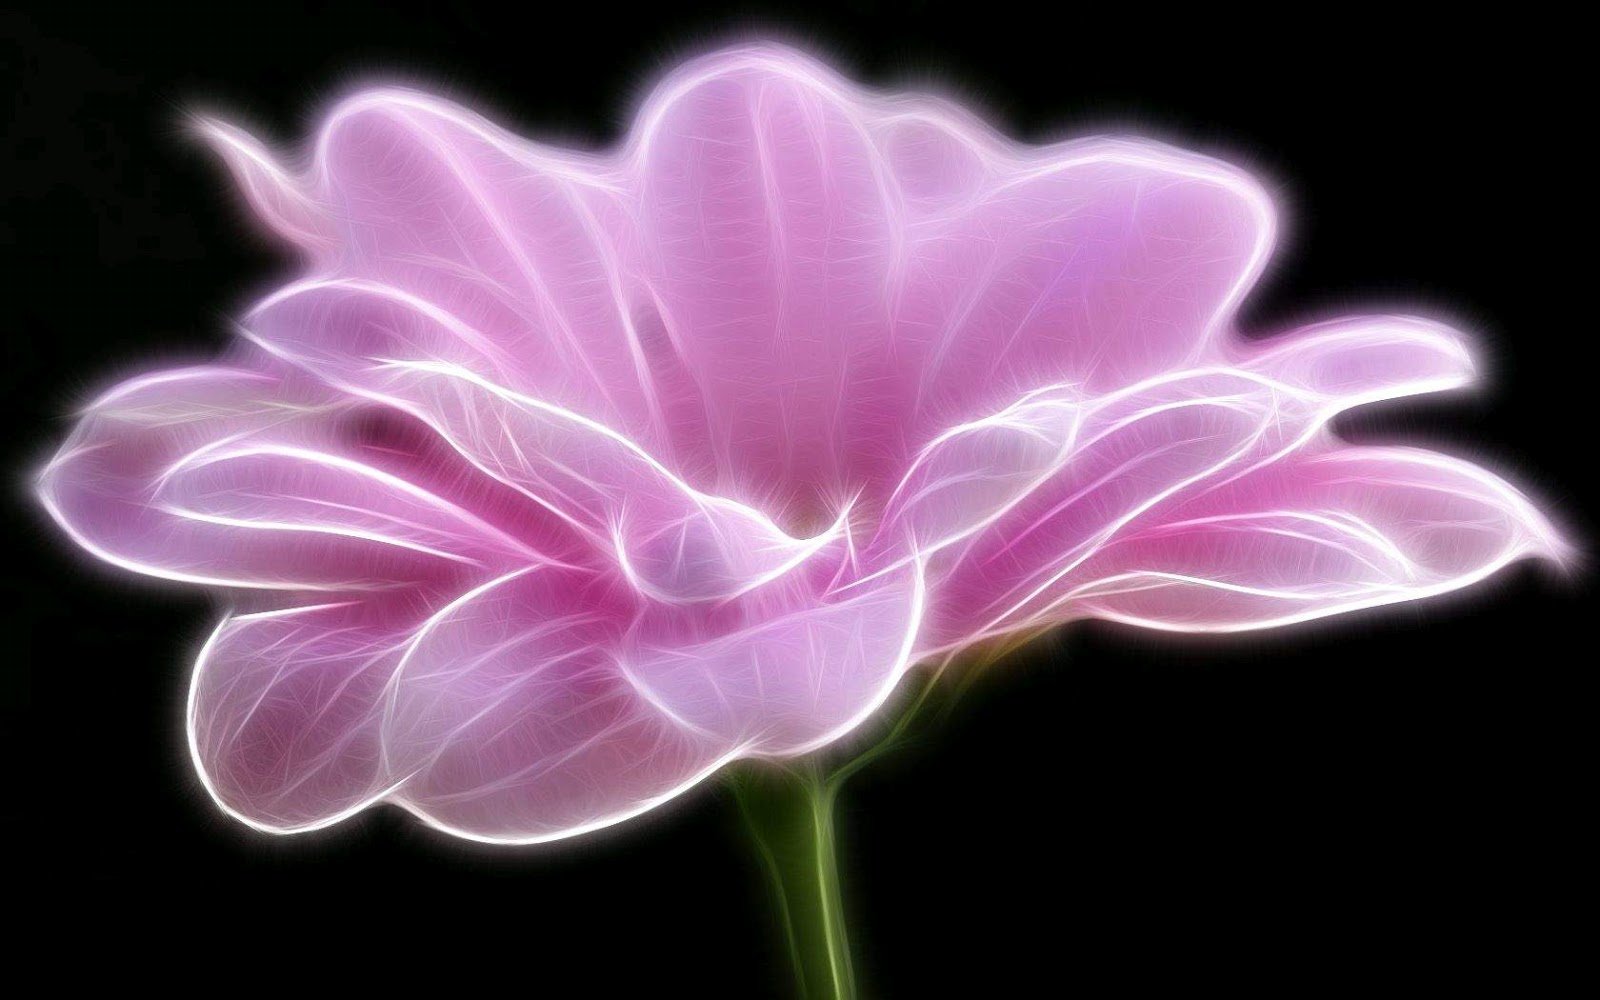 Black and White Wallpapers Artistic Pink Flower Wallpaper